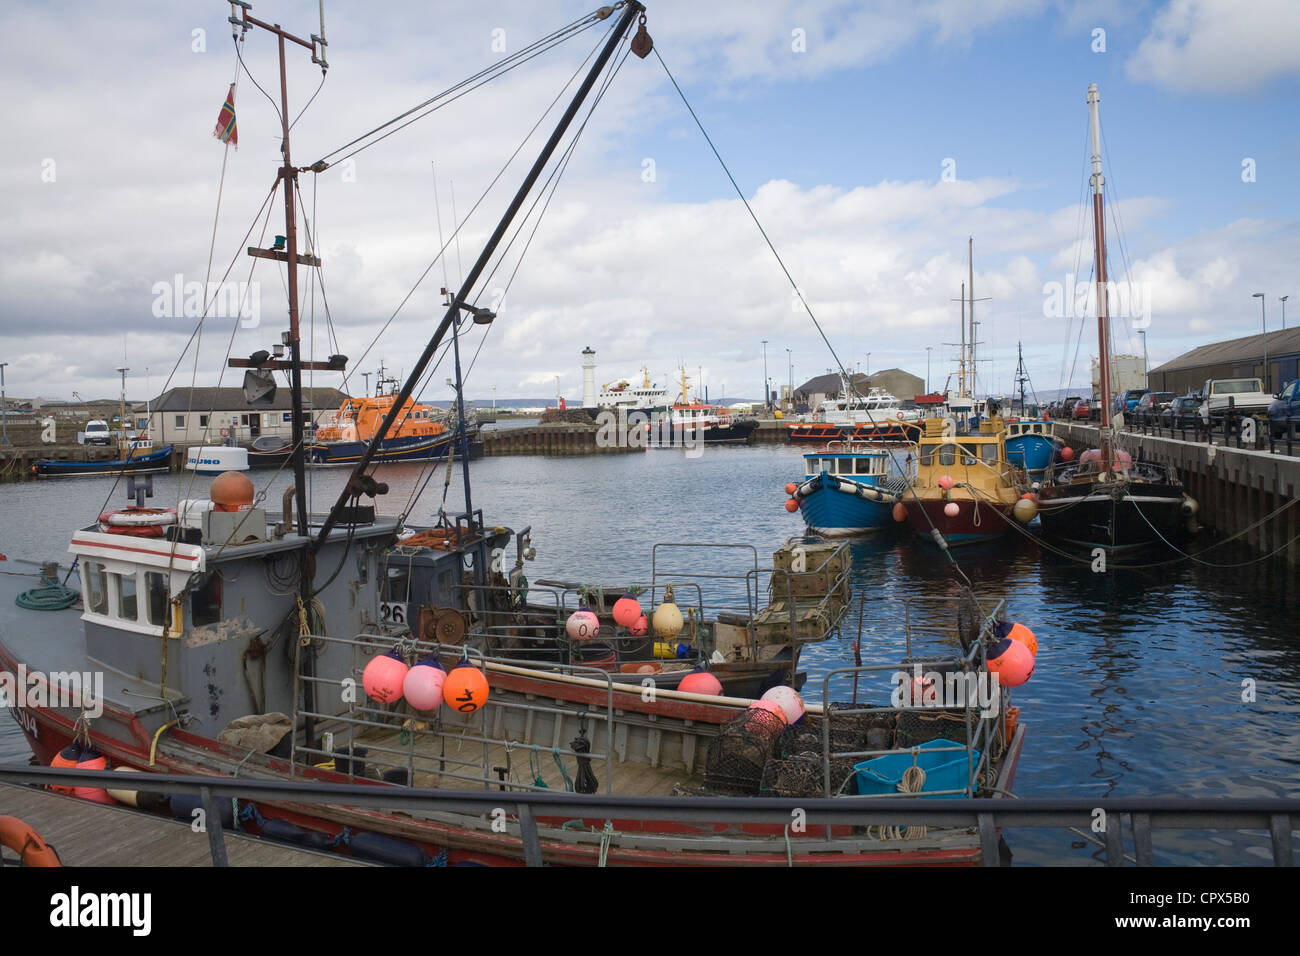 Kirkwall Orkney Islands UK Fishing boats and lifeboat moored in the harbour capital town on lovely May day weather Stock Photo